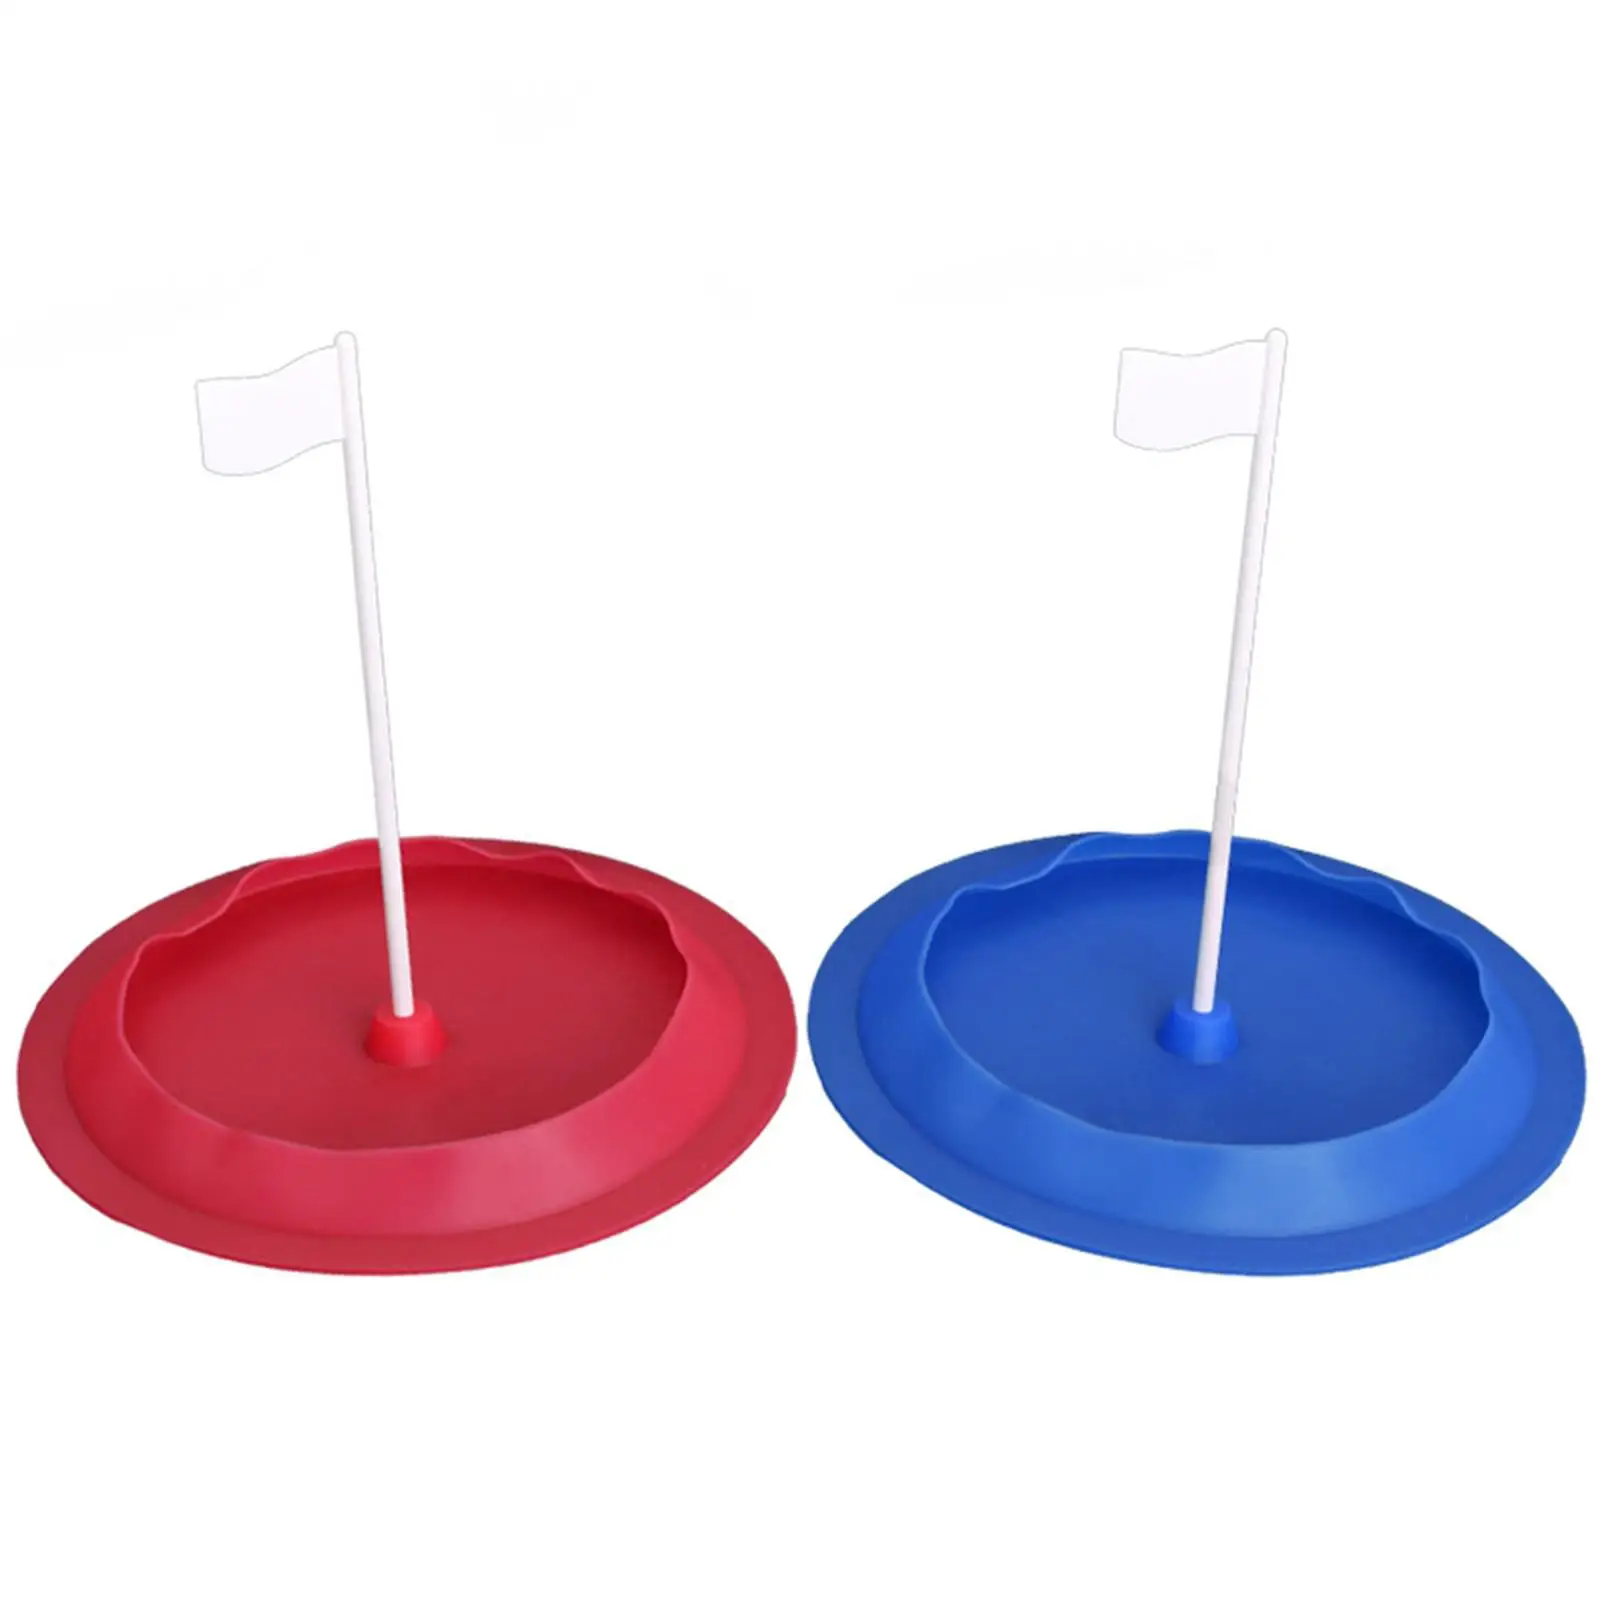 Golf Putting Cup Durable with Flag Flexible Golf Training Aid Golf Accessories Golf Putting Hole Cup for Adults Women Men Indoor